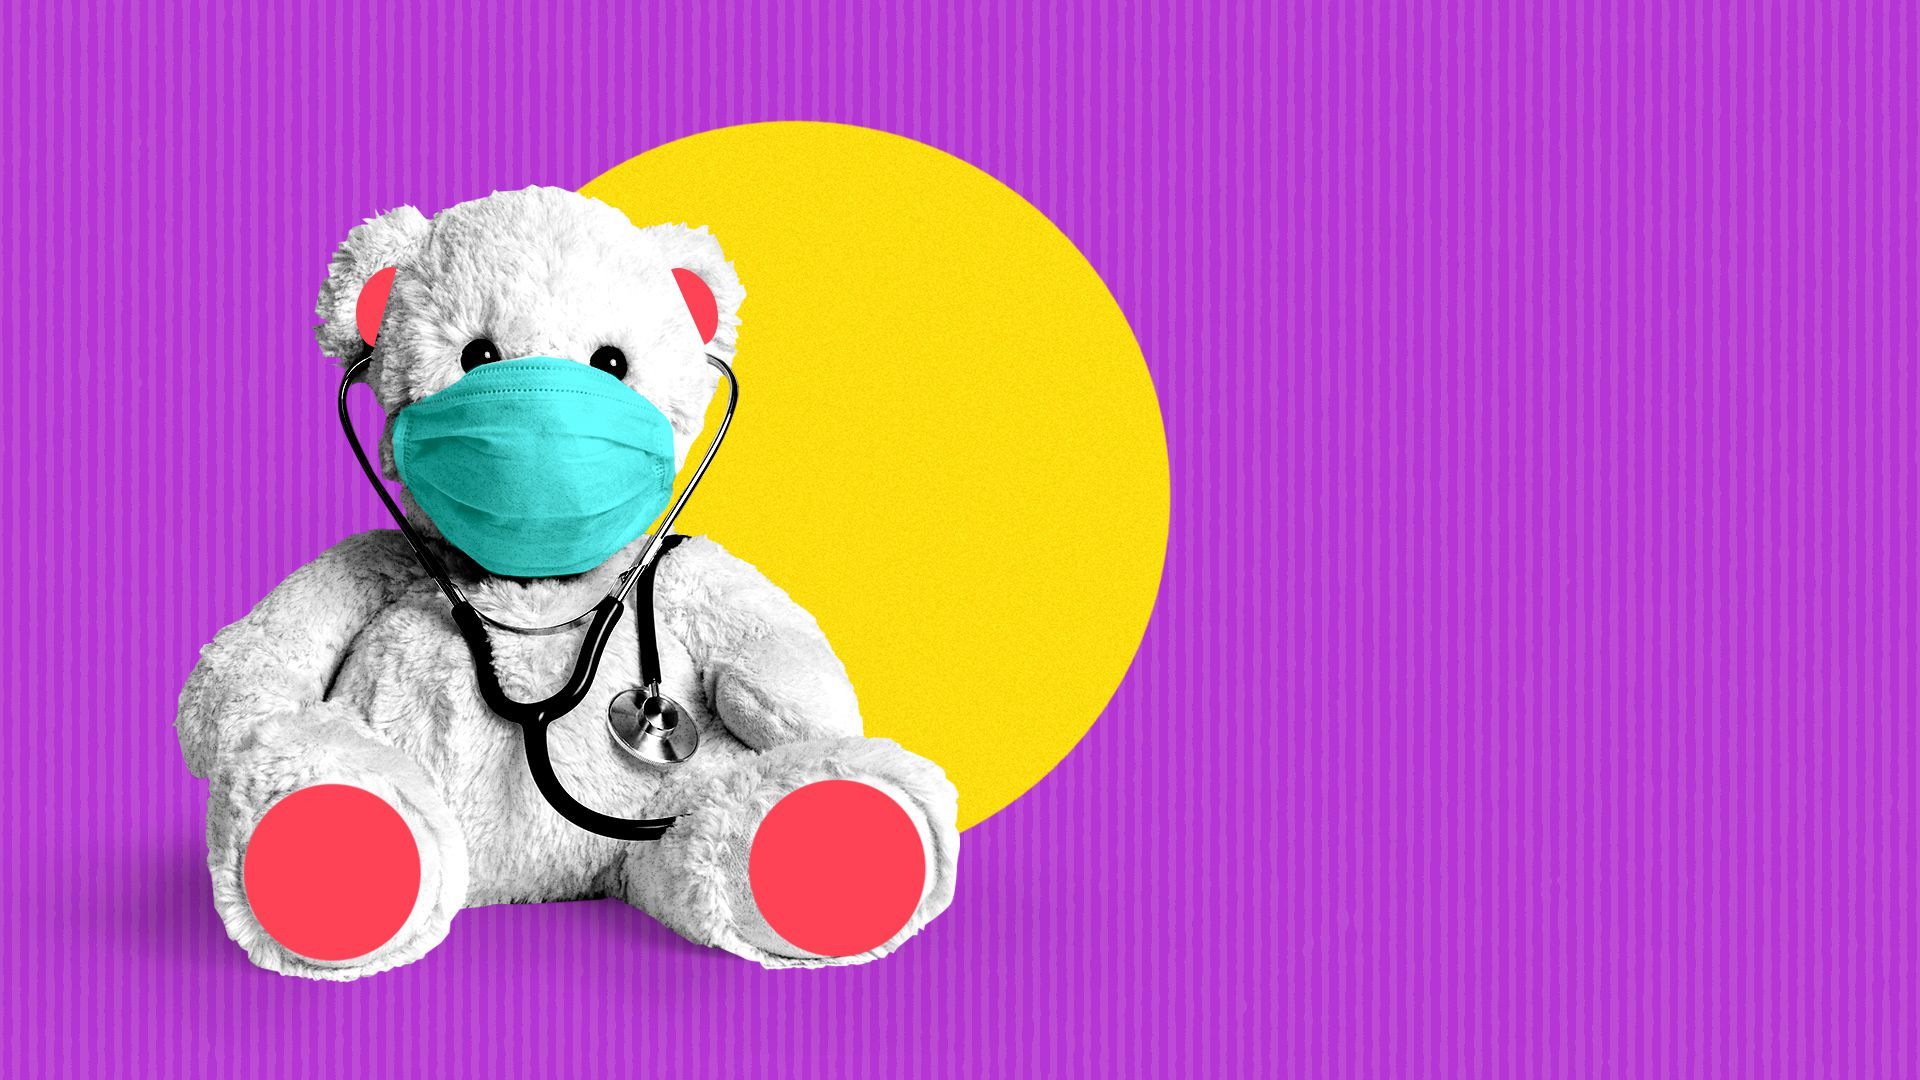 Illustration of a teddy bear wearing a surgical mask surrounded by colored circles. 